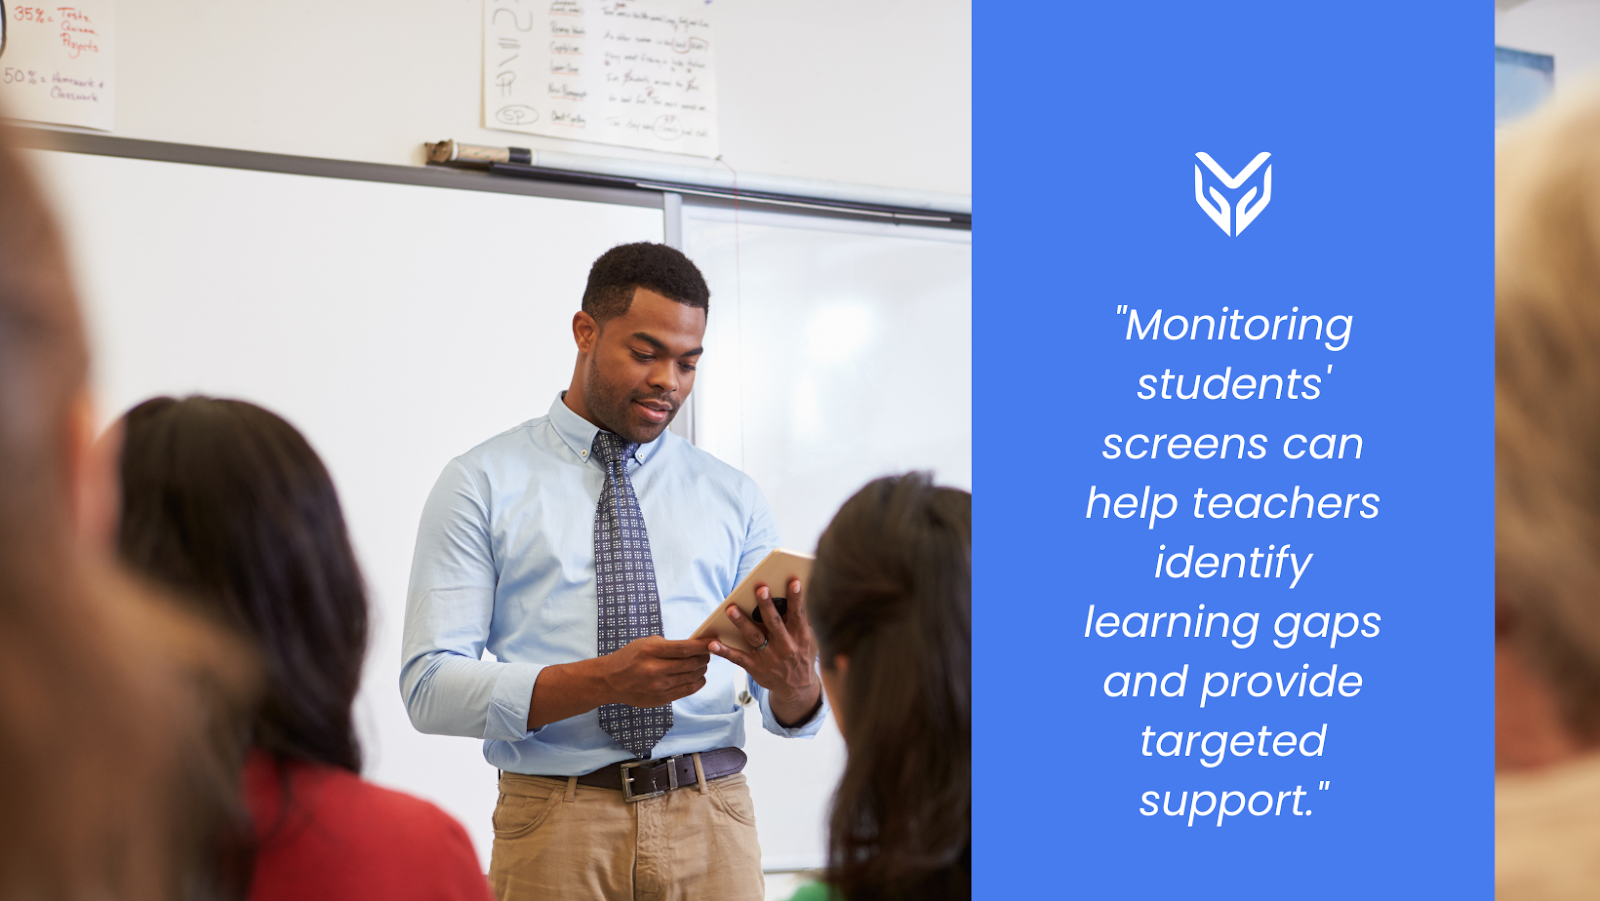 This Is How Monitoring Students' Screens Empowers Teachers